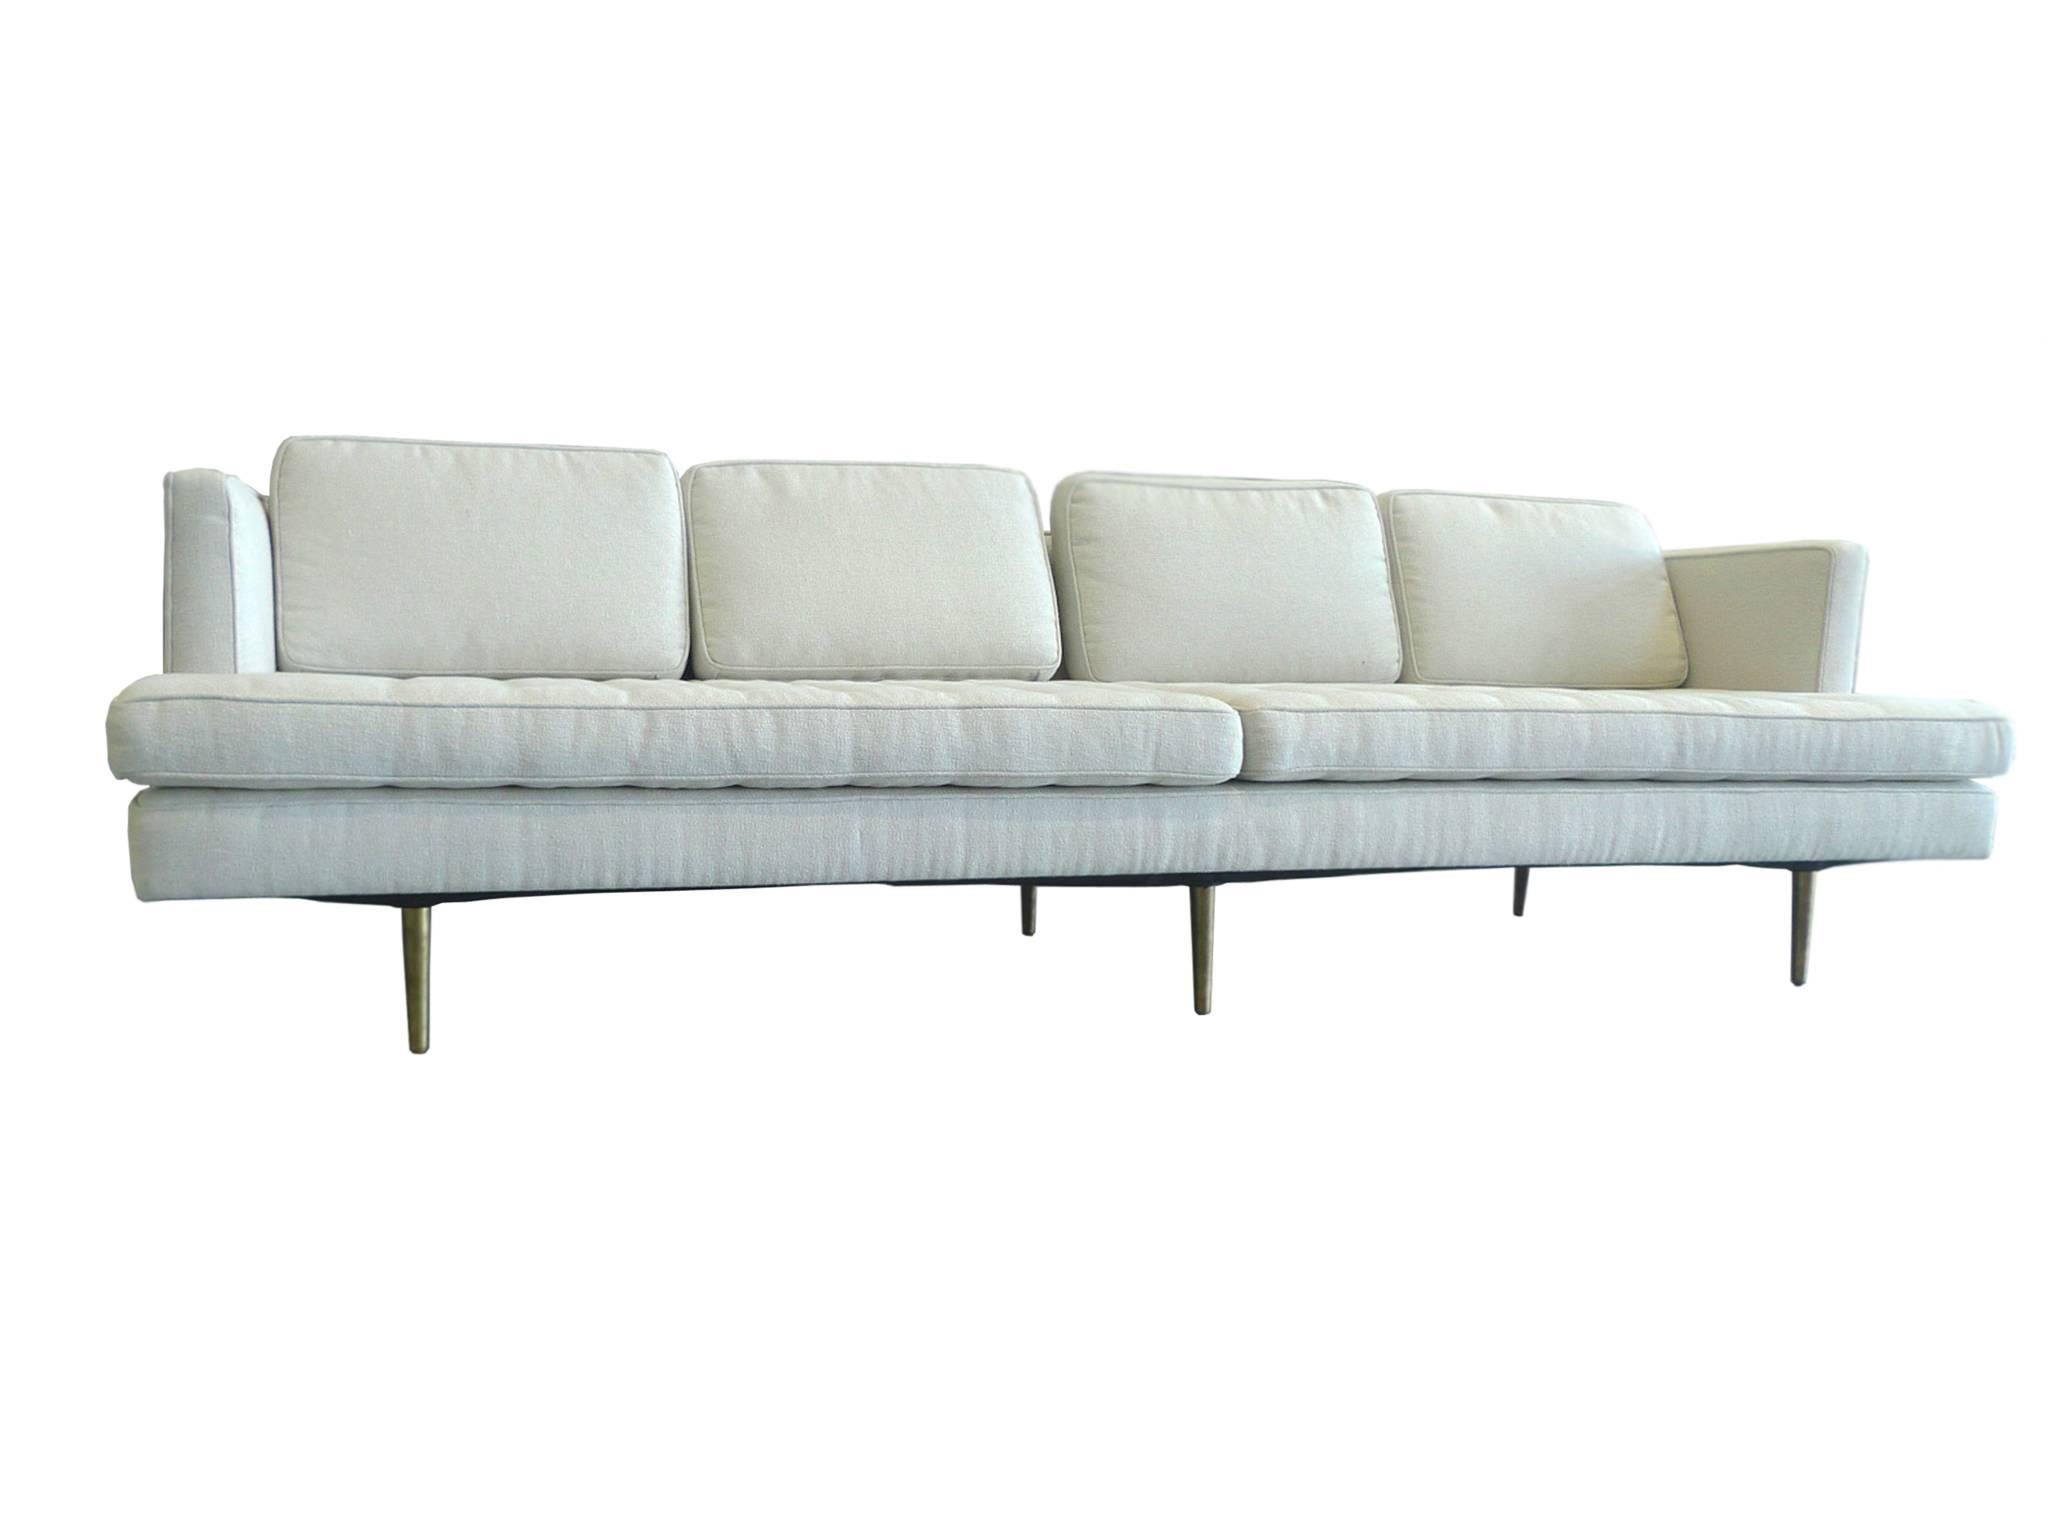 This sofa was designed by Edward Wormley for Dunbar. It is newly reupholstered in an oatmeal-white cotton bouclé. Like many of Wormley's modern designs, this sofa has clean, Stark lines punctuated by subtle decorative elements. They include the six